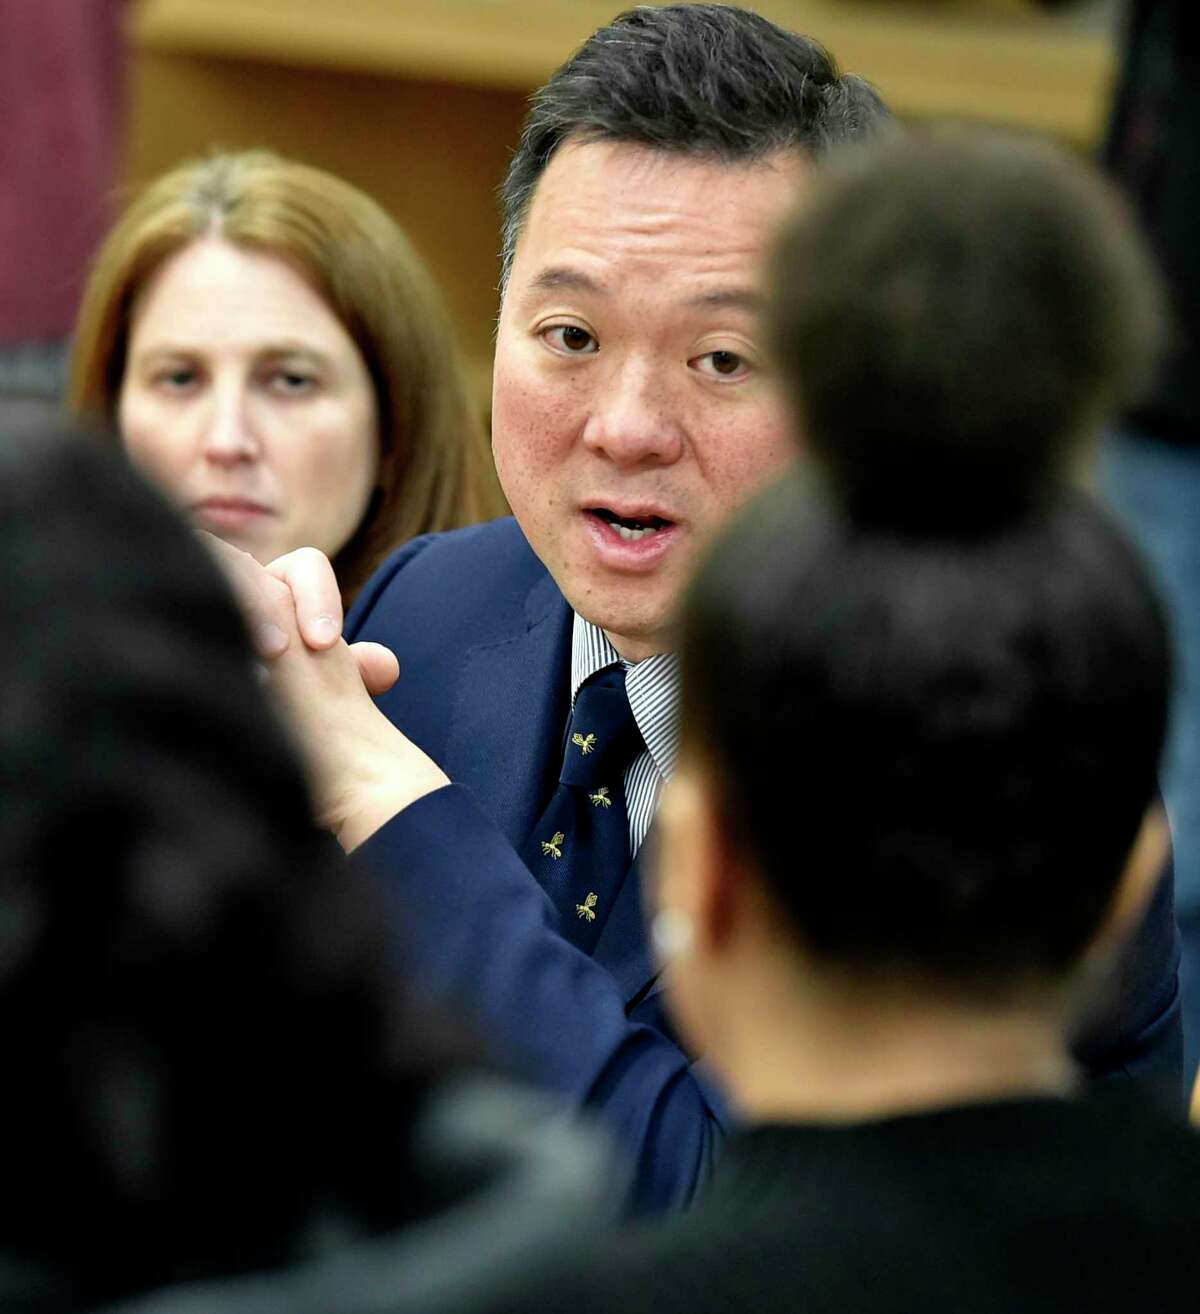 Connecticut Attorney General William Tong, right, with Connecticut Consumer Protection Commissioner Michelle H. Seagull, left, speak with Hillhouse High School students Tuesday, February 25, 2020 at Hillhouse in New Haven about the impact of Juul and vaping. Tong and Attorneys General from Florida, Nevada, Oregon and Texas today announced a bipartisan, multistate investigation into Juul Labs. The 39-state coalition is “investigating Juul’s marketing and sales practices, including targeting of youth, claims regarding nicotine content, and statements regarding risks, safety and effectiveness as a smoking cessation device.”